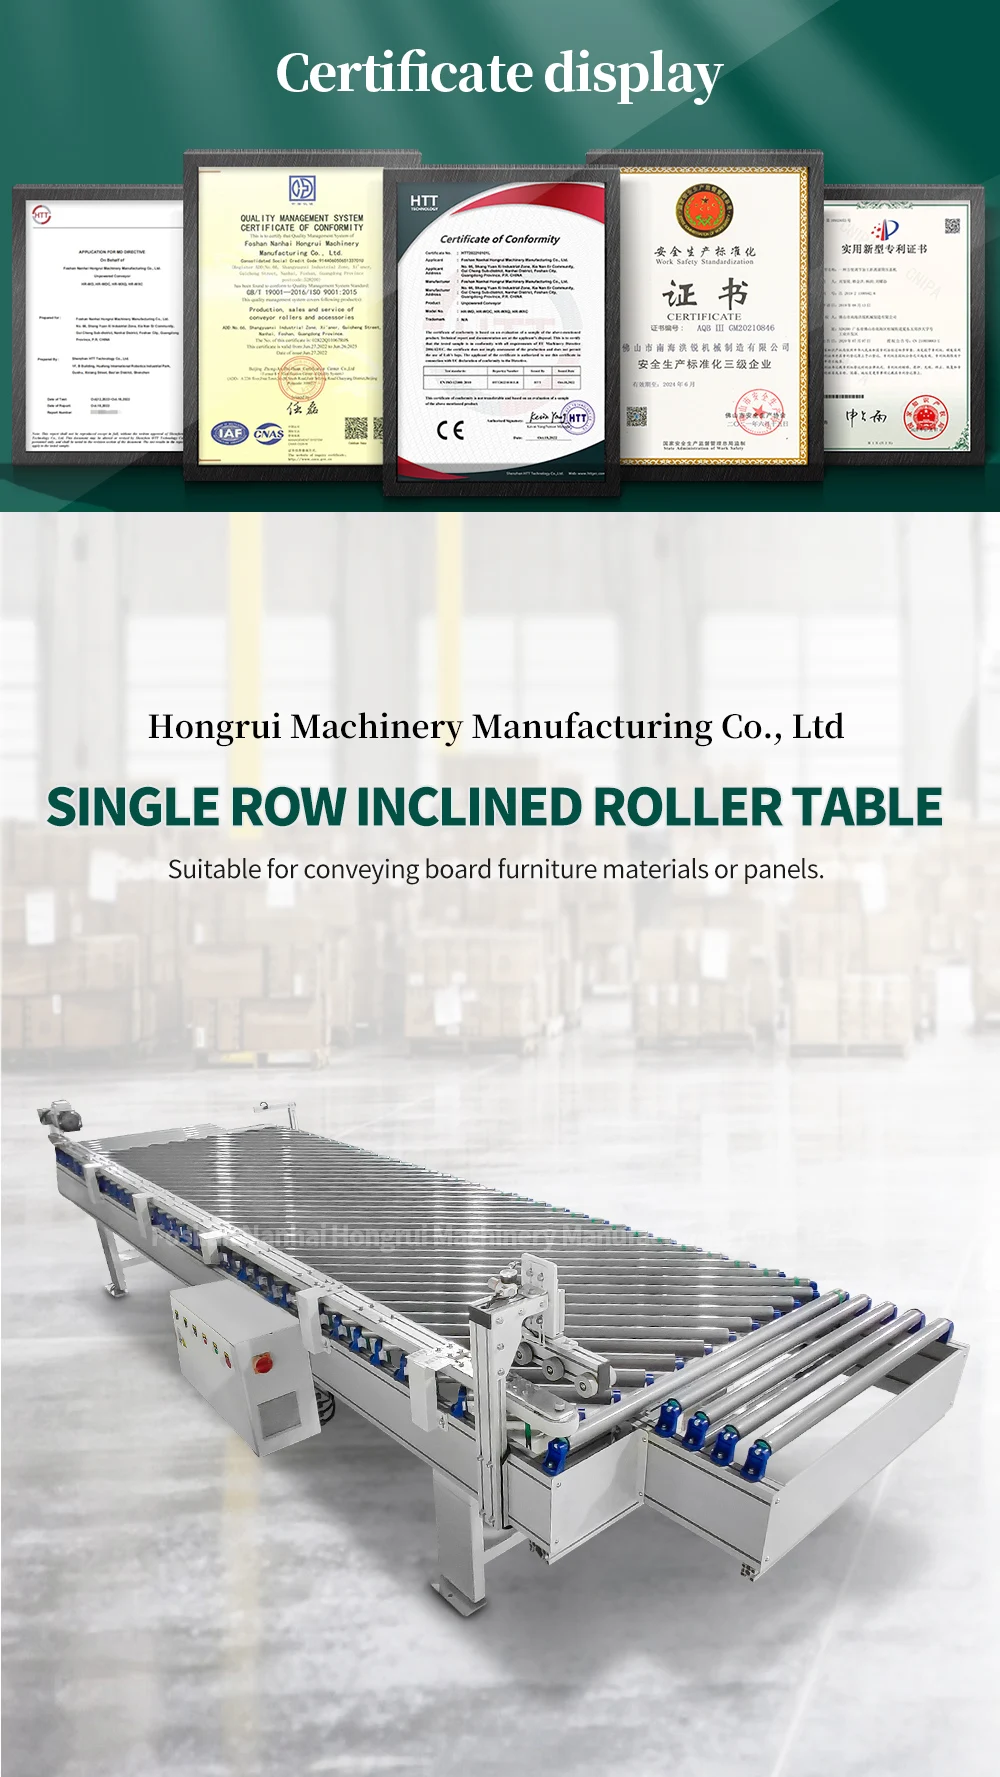 Hongrui edge banding machine is connected to a single row inclined roller table for conveying wooden boards manufacture